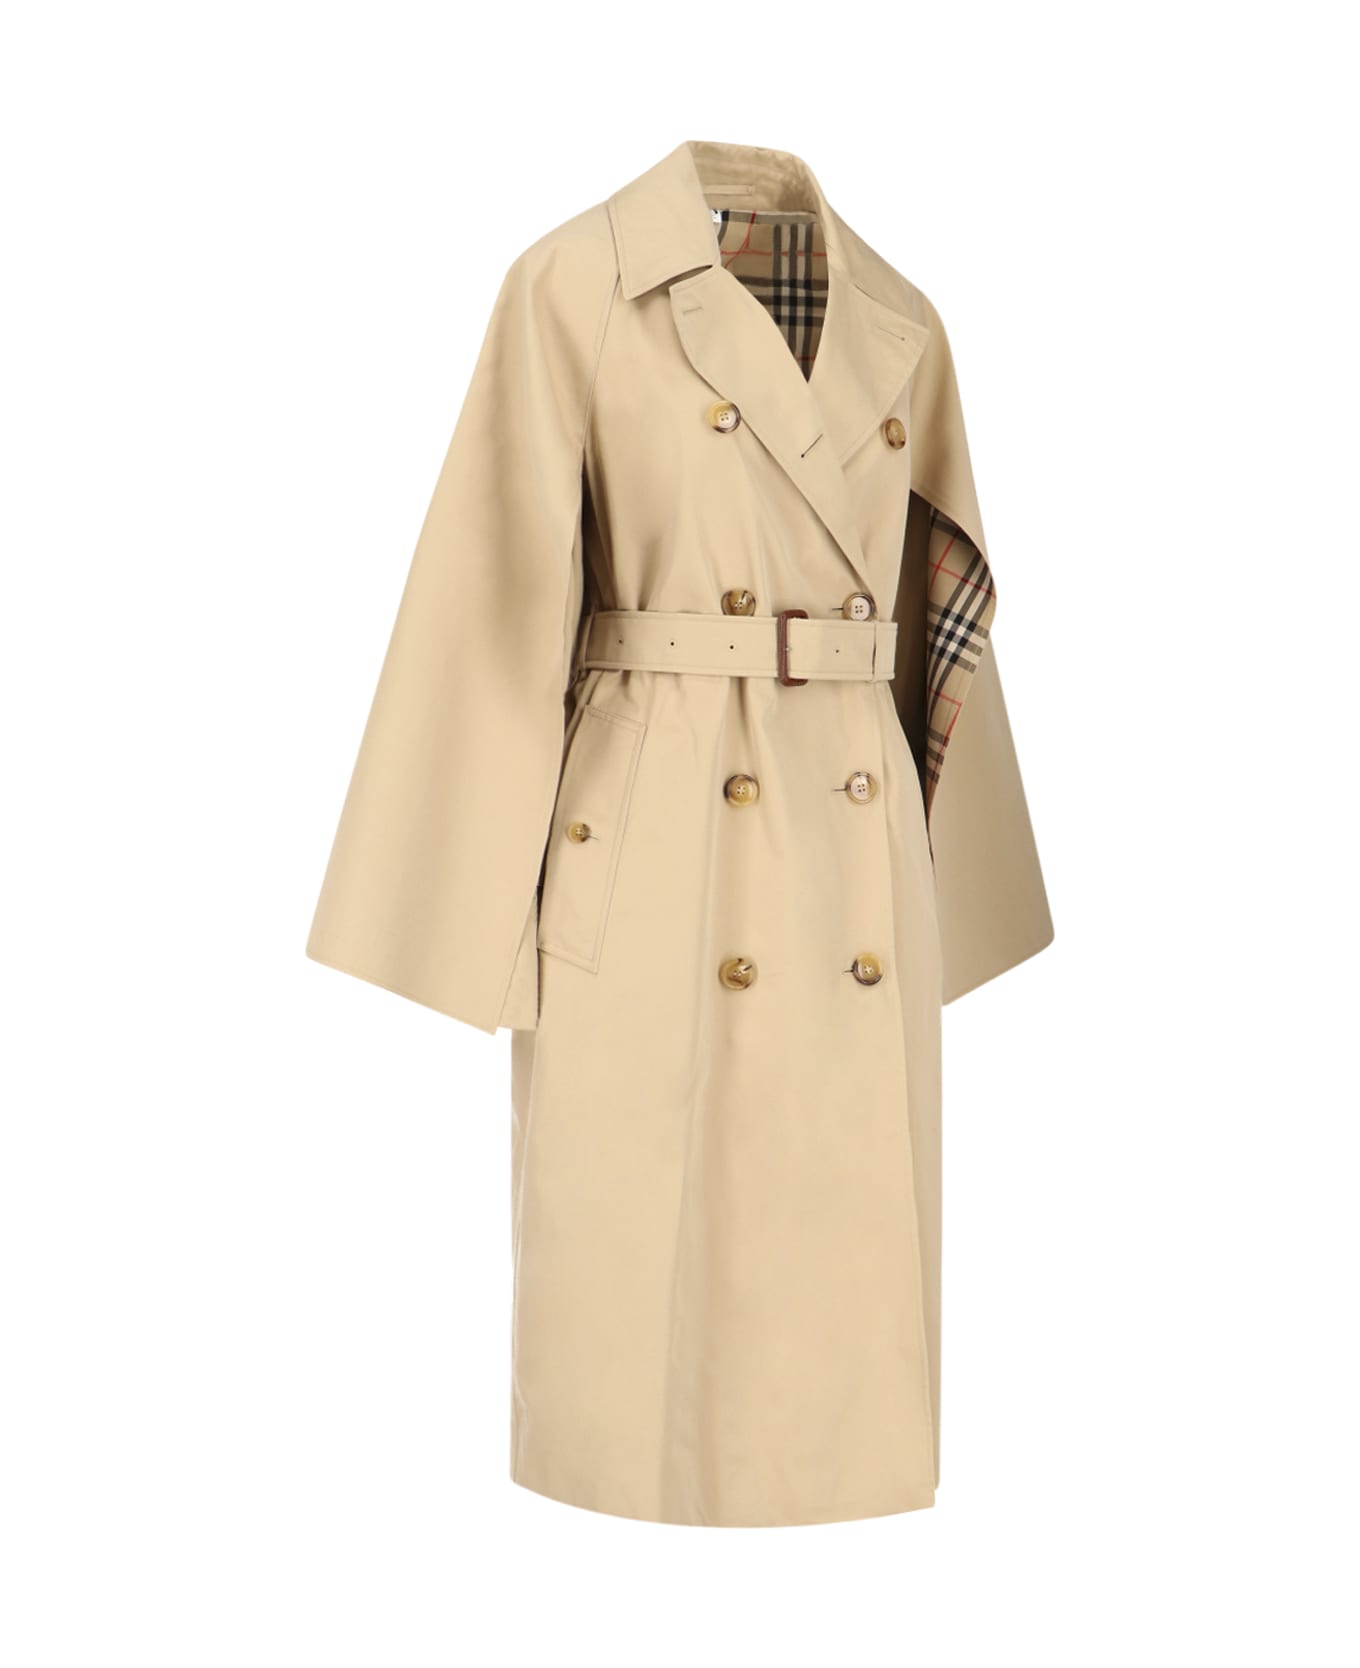 Burberry Double-breasted Trench Coat - Beige